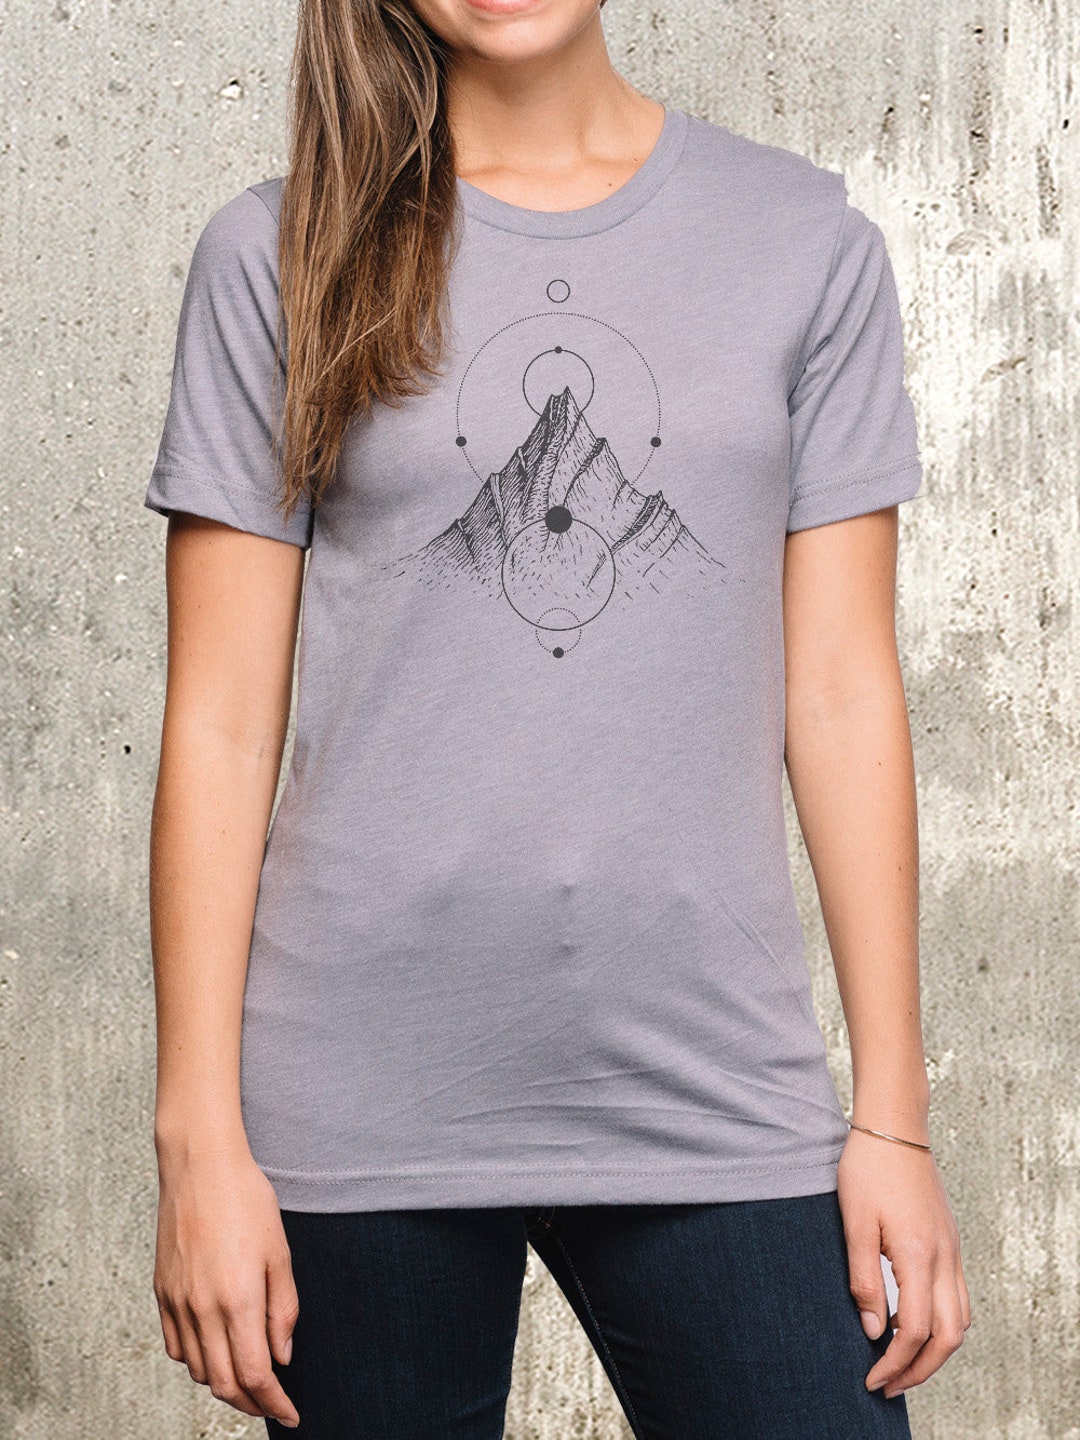 T Shirts for Women Mountain Lines Design Nature Tshirt - Etsy